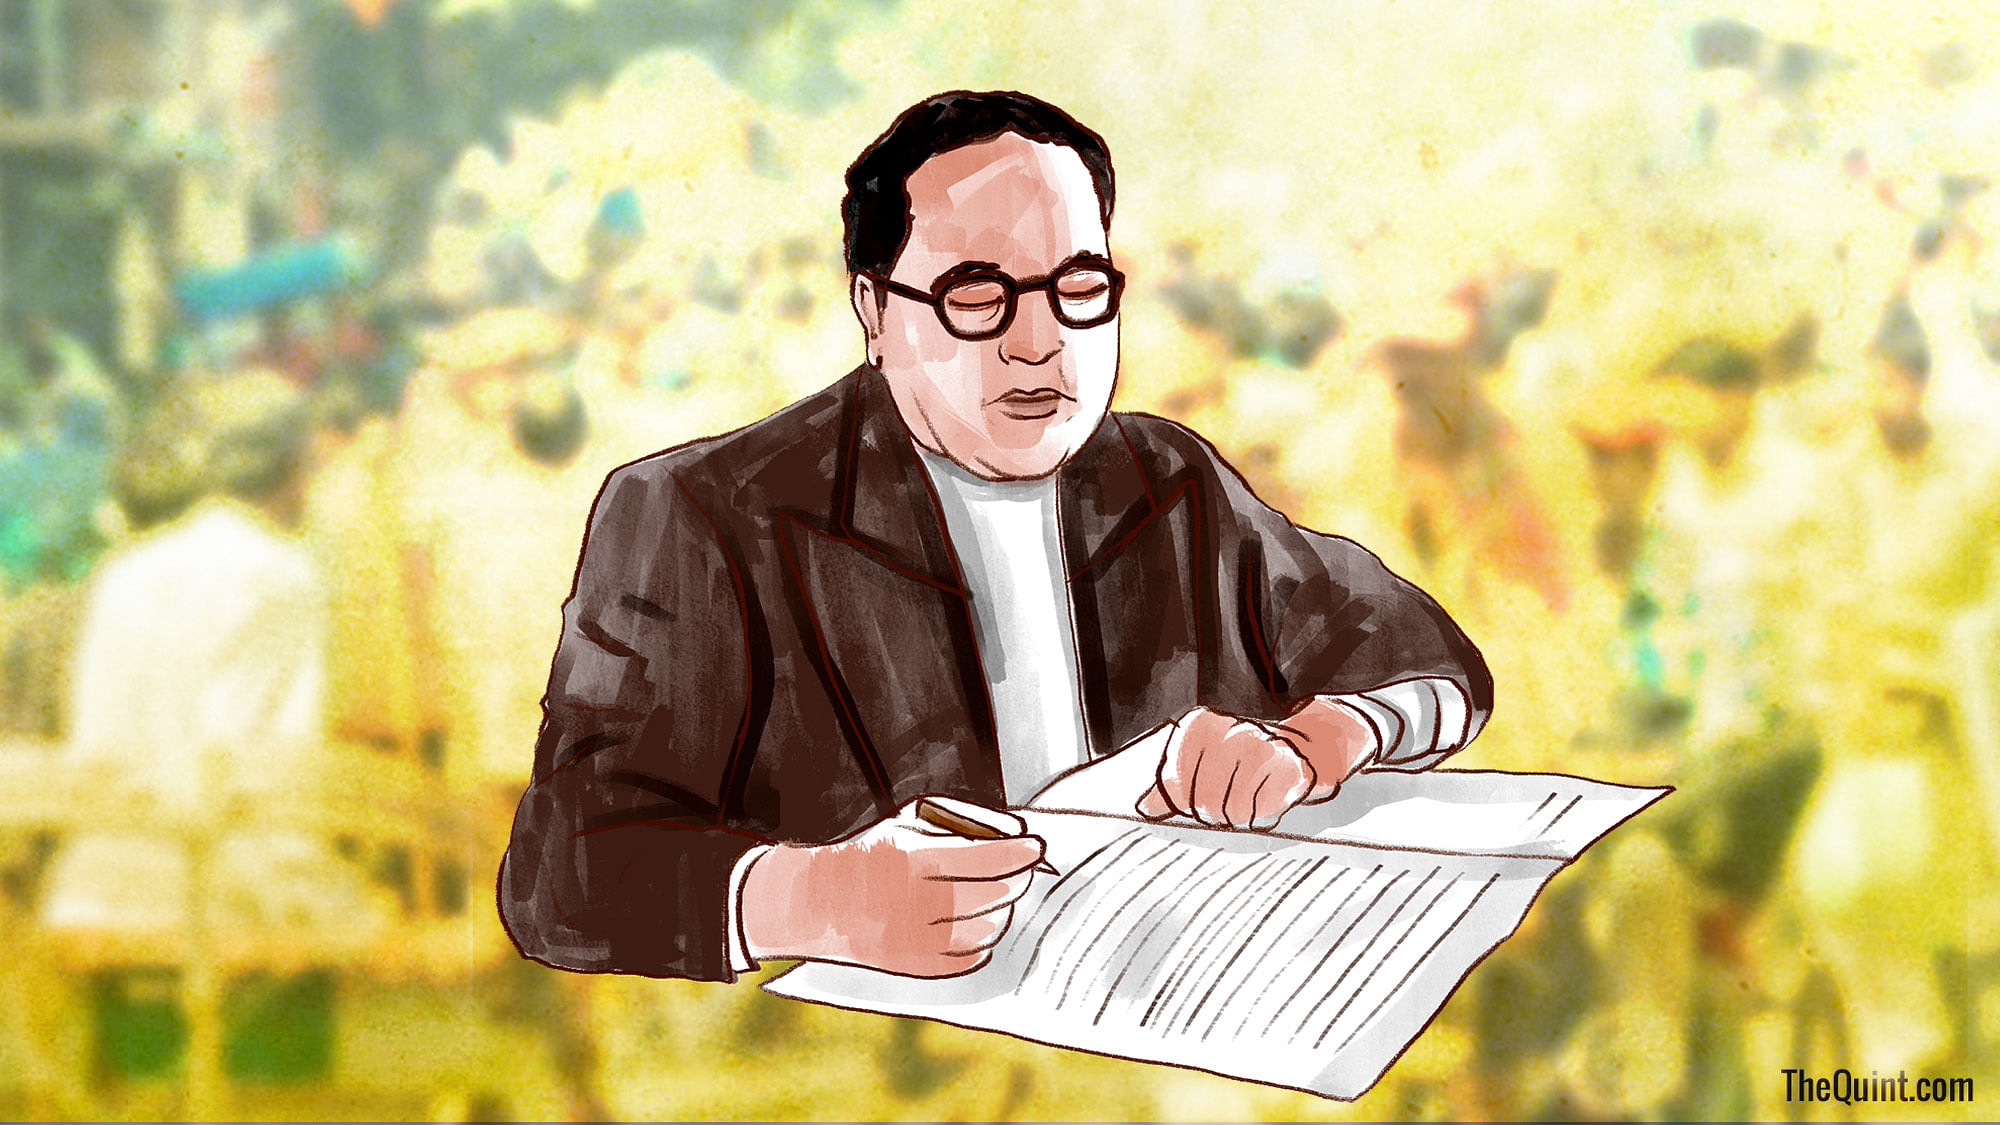 On 14 October 1956, Dr BR Ambedkar, the architect of the Indian Constitution, took a life-altering decision. The Dalit leader decided to quit Hinduism and take up Buddhism, along with close to 3,65,000 of his followers, in Nagpur.